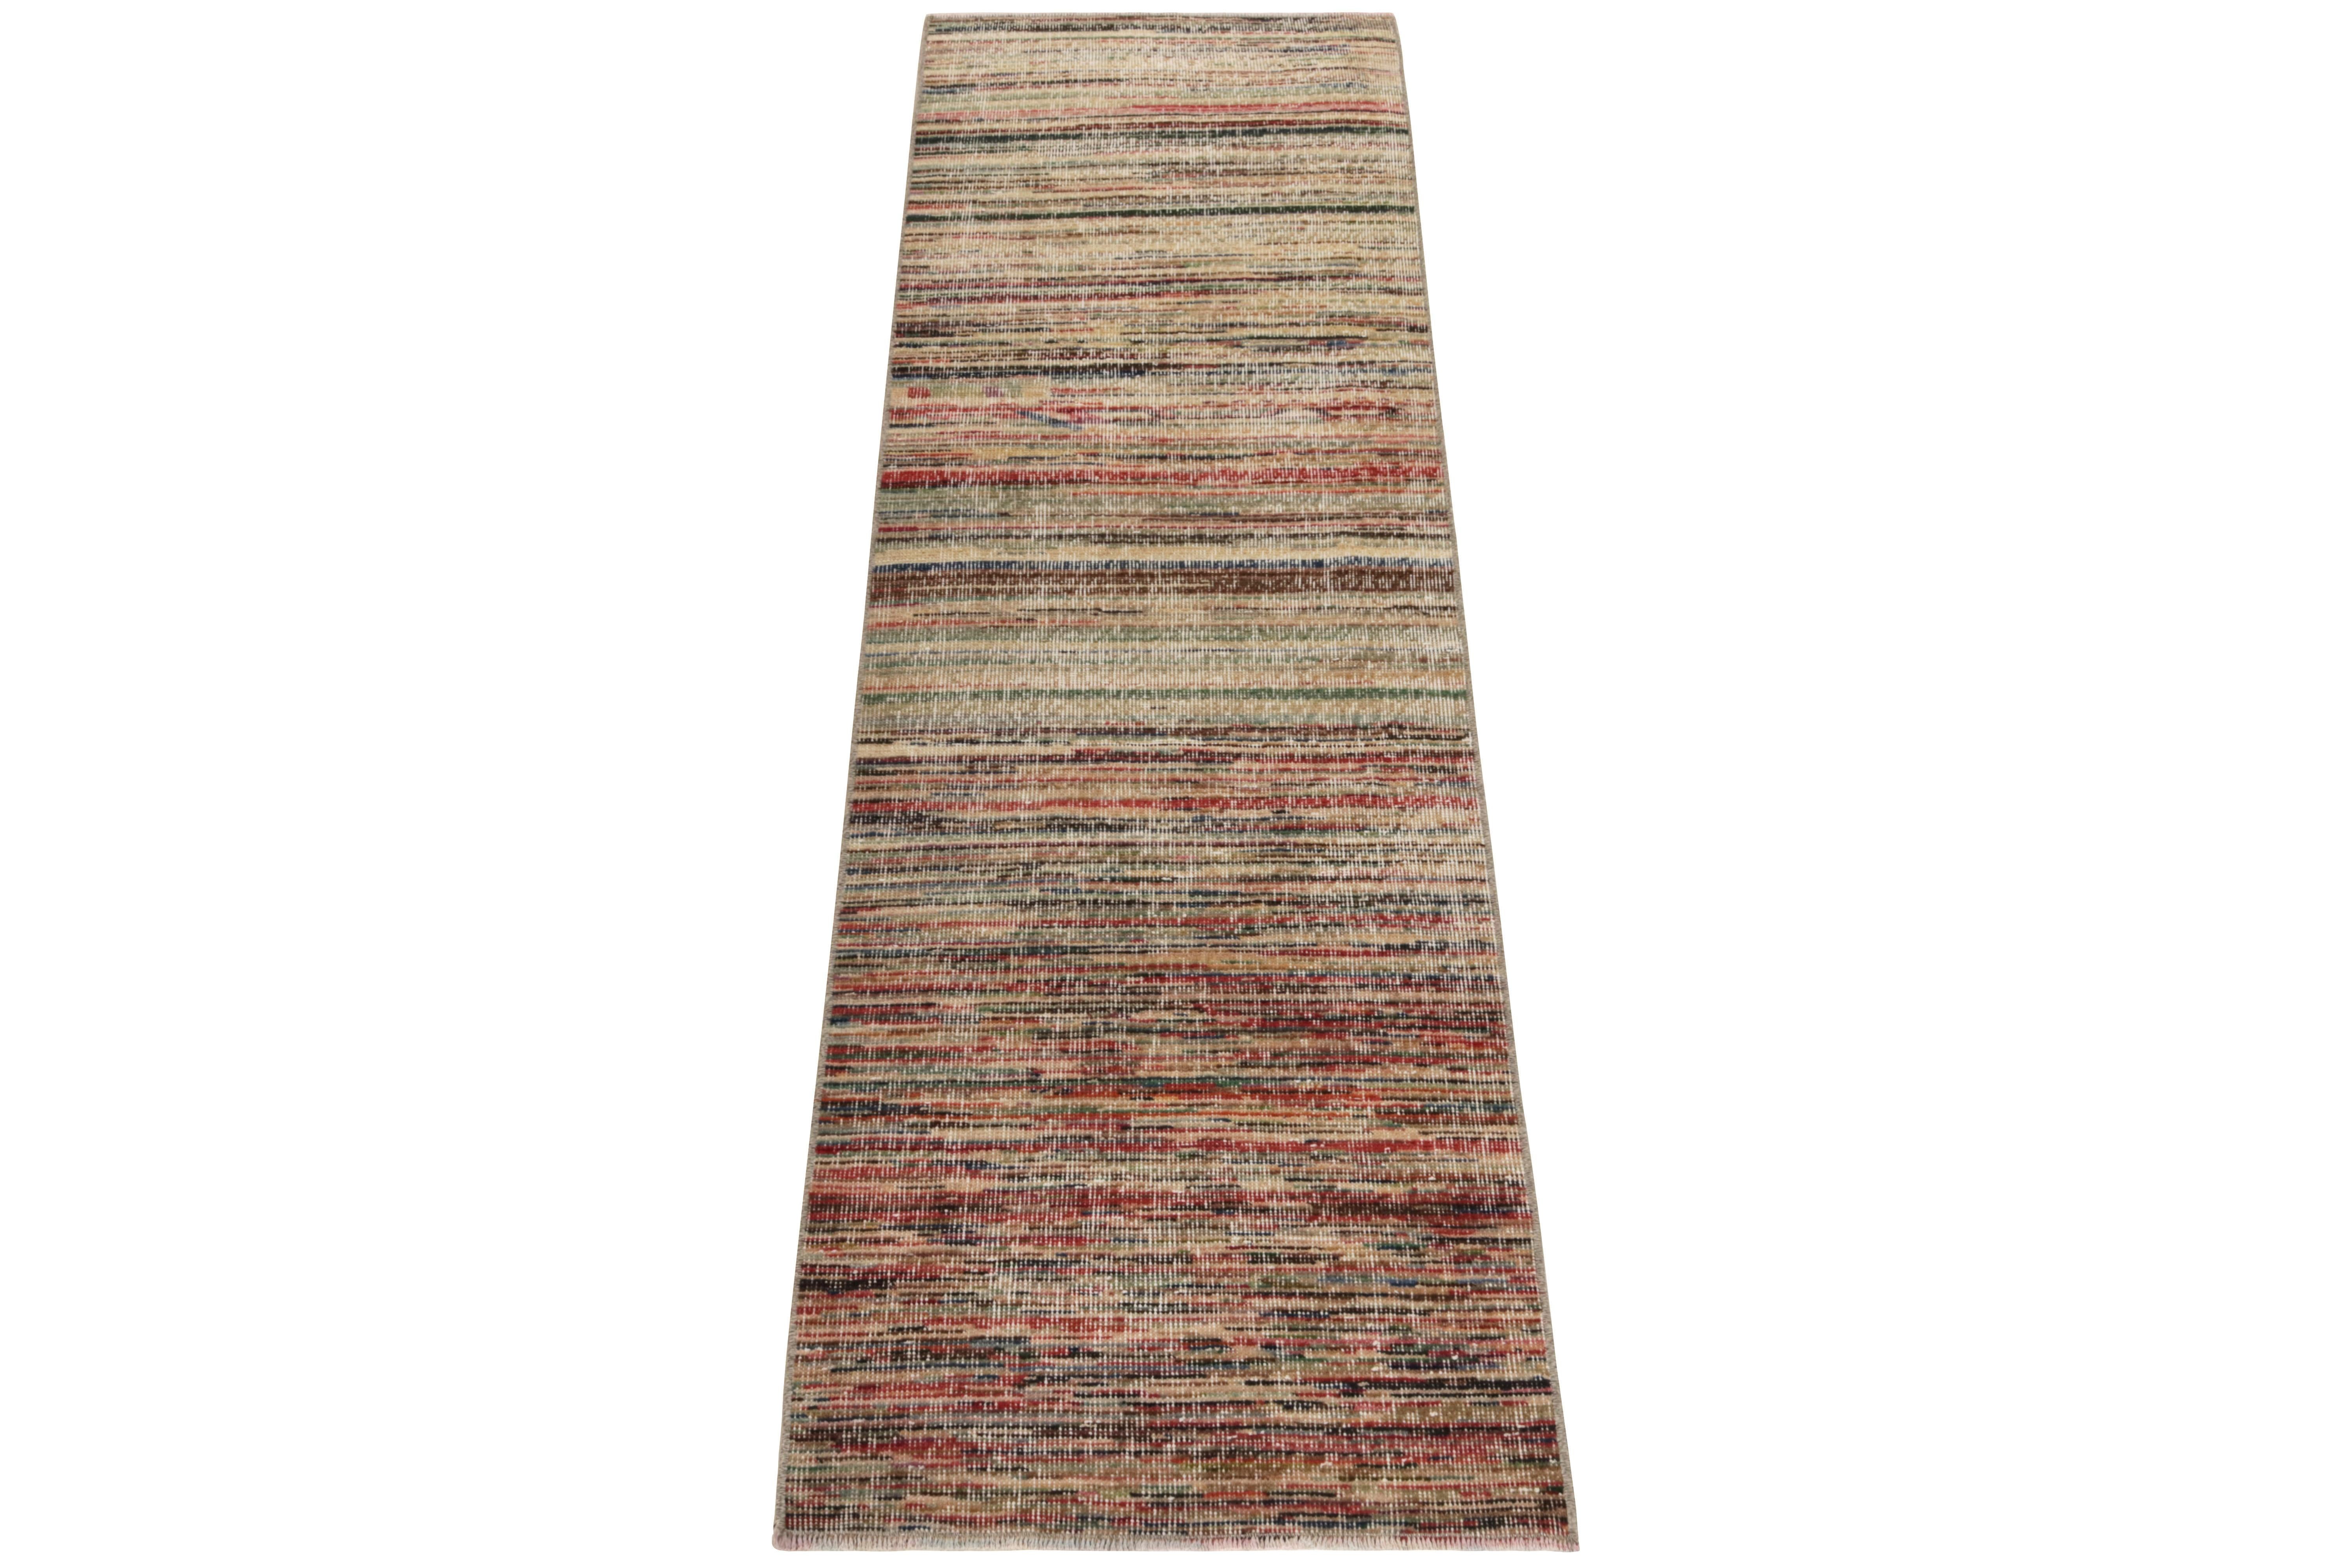 From Rug & Kilim’s mid century Pasha collection, a 1960s runner celebrating the works of a venerated designer from Turkey. 

Hand-knotted in an intentionally refined wool pile, this 2x9 rug enjoys a play of variegated shades blending seamlessly